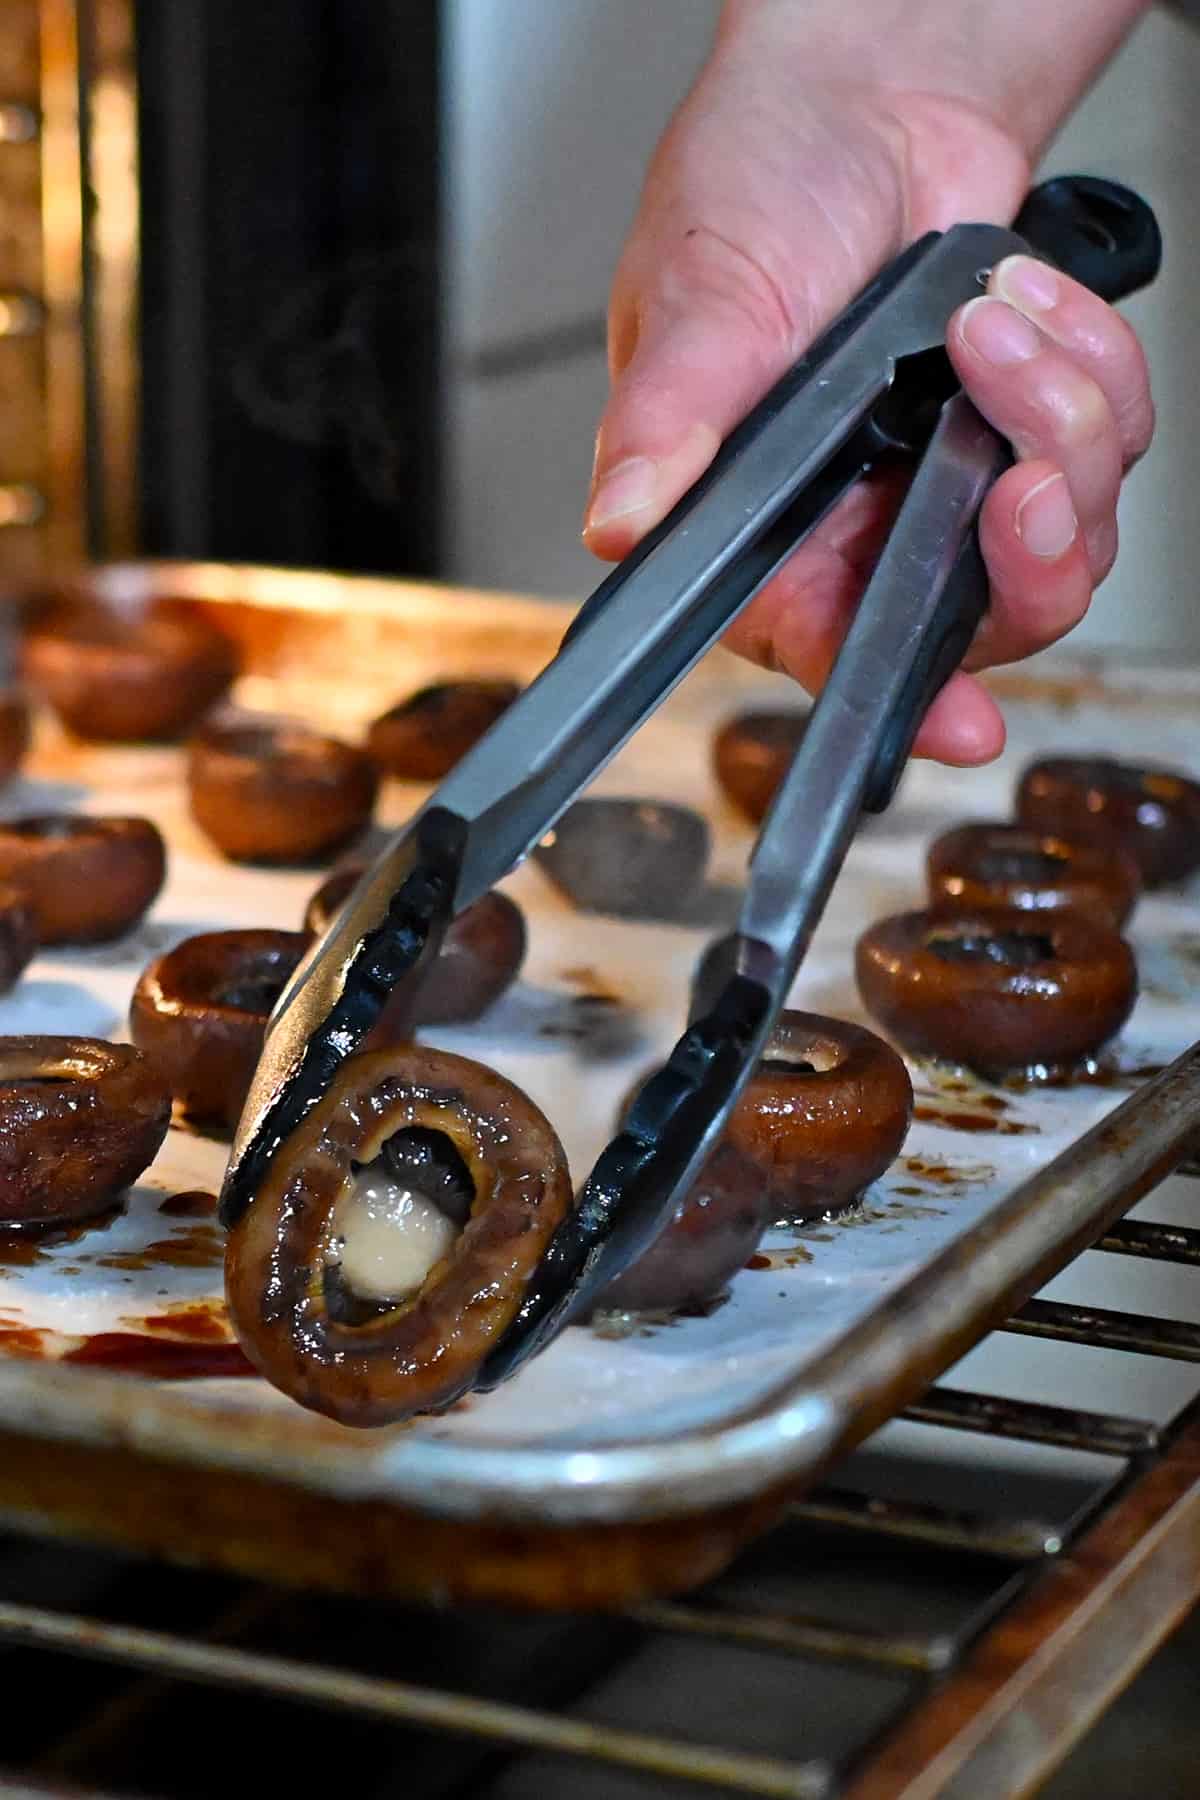 A pair of tongs are flipping over the roasted cremini mushrooms so they are gill-side up.